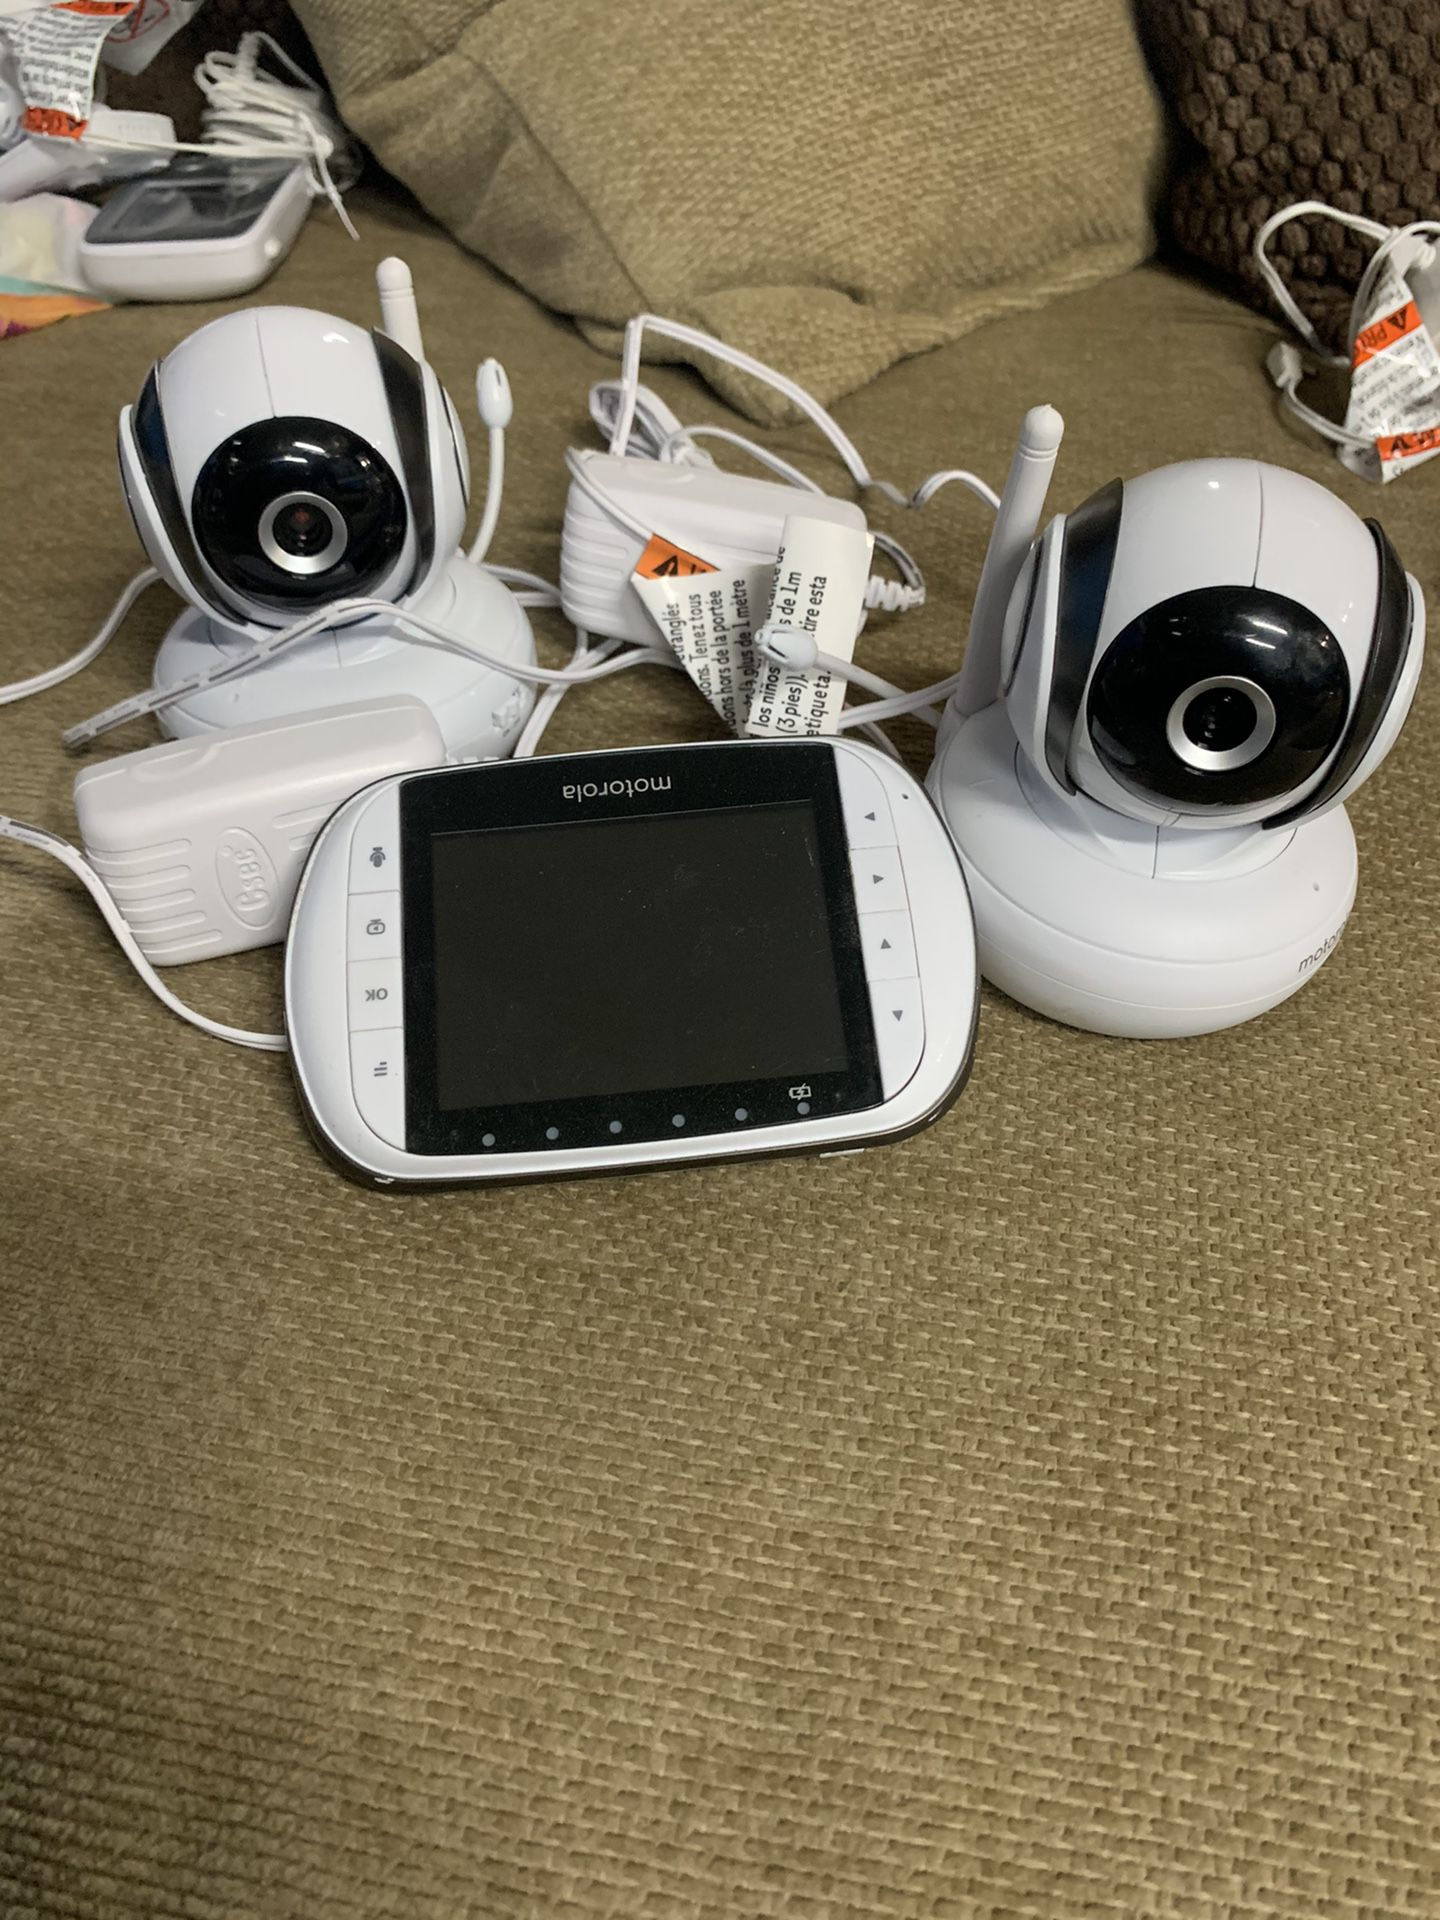 110 for all of them or 45$ each. Baby monitors